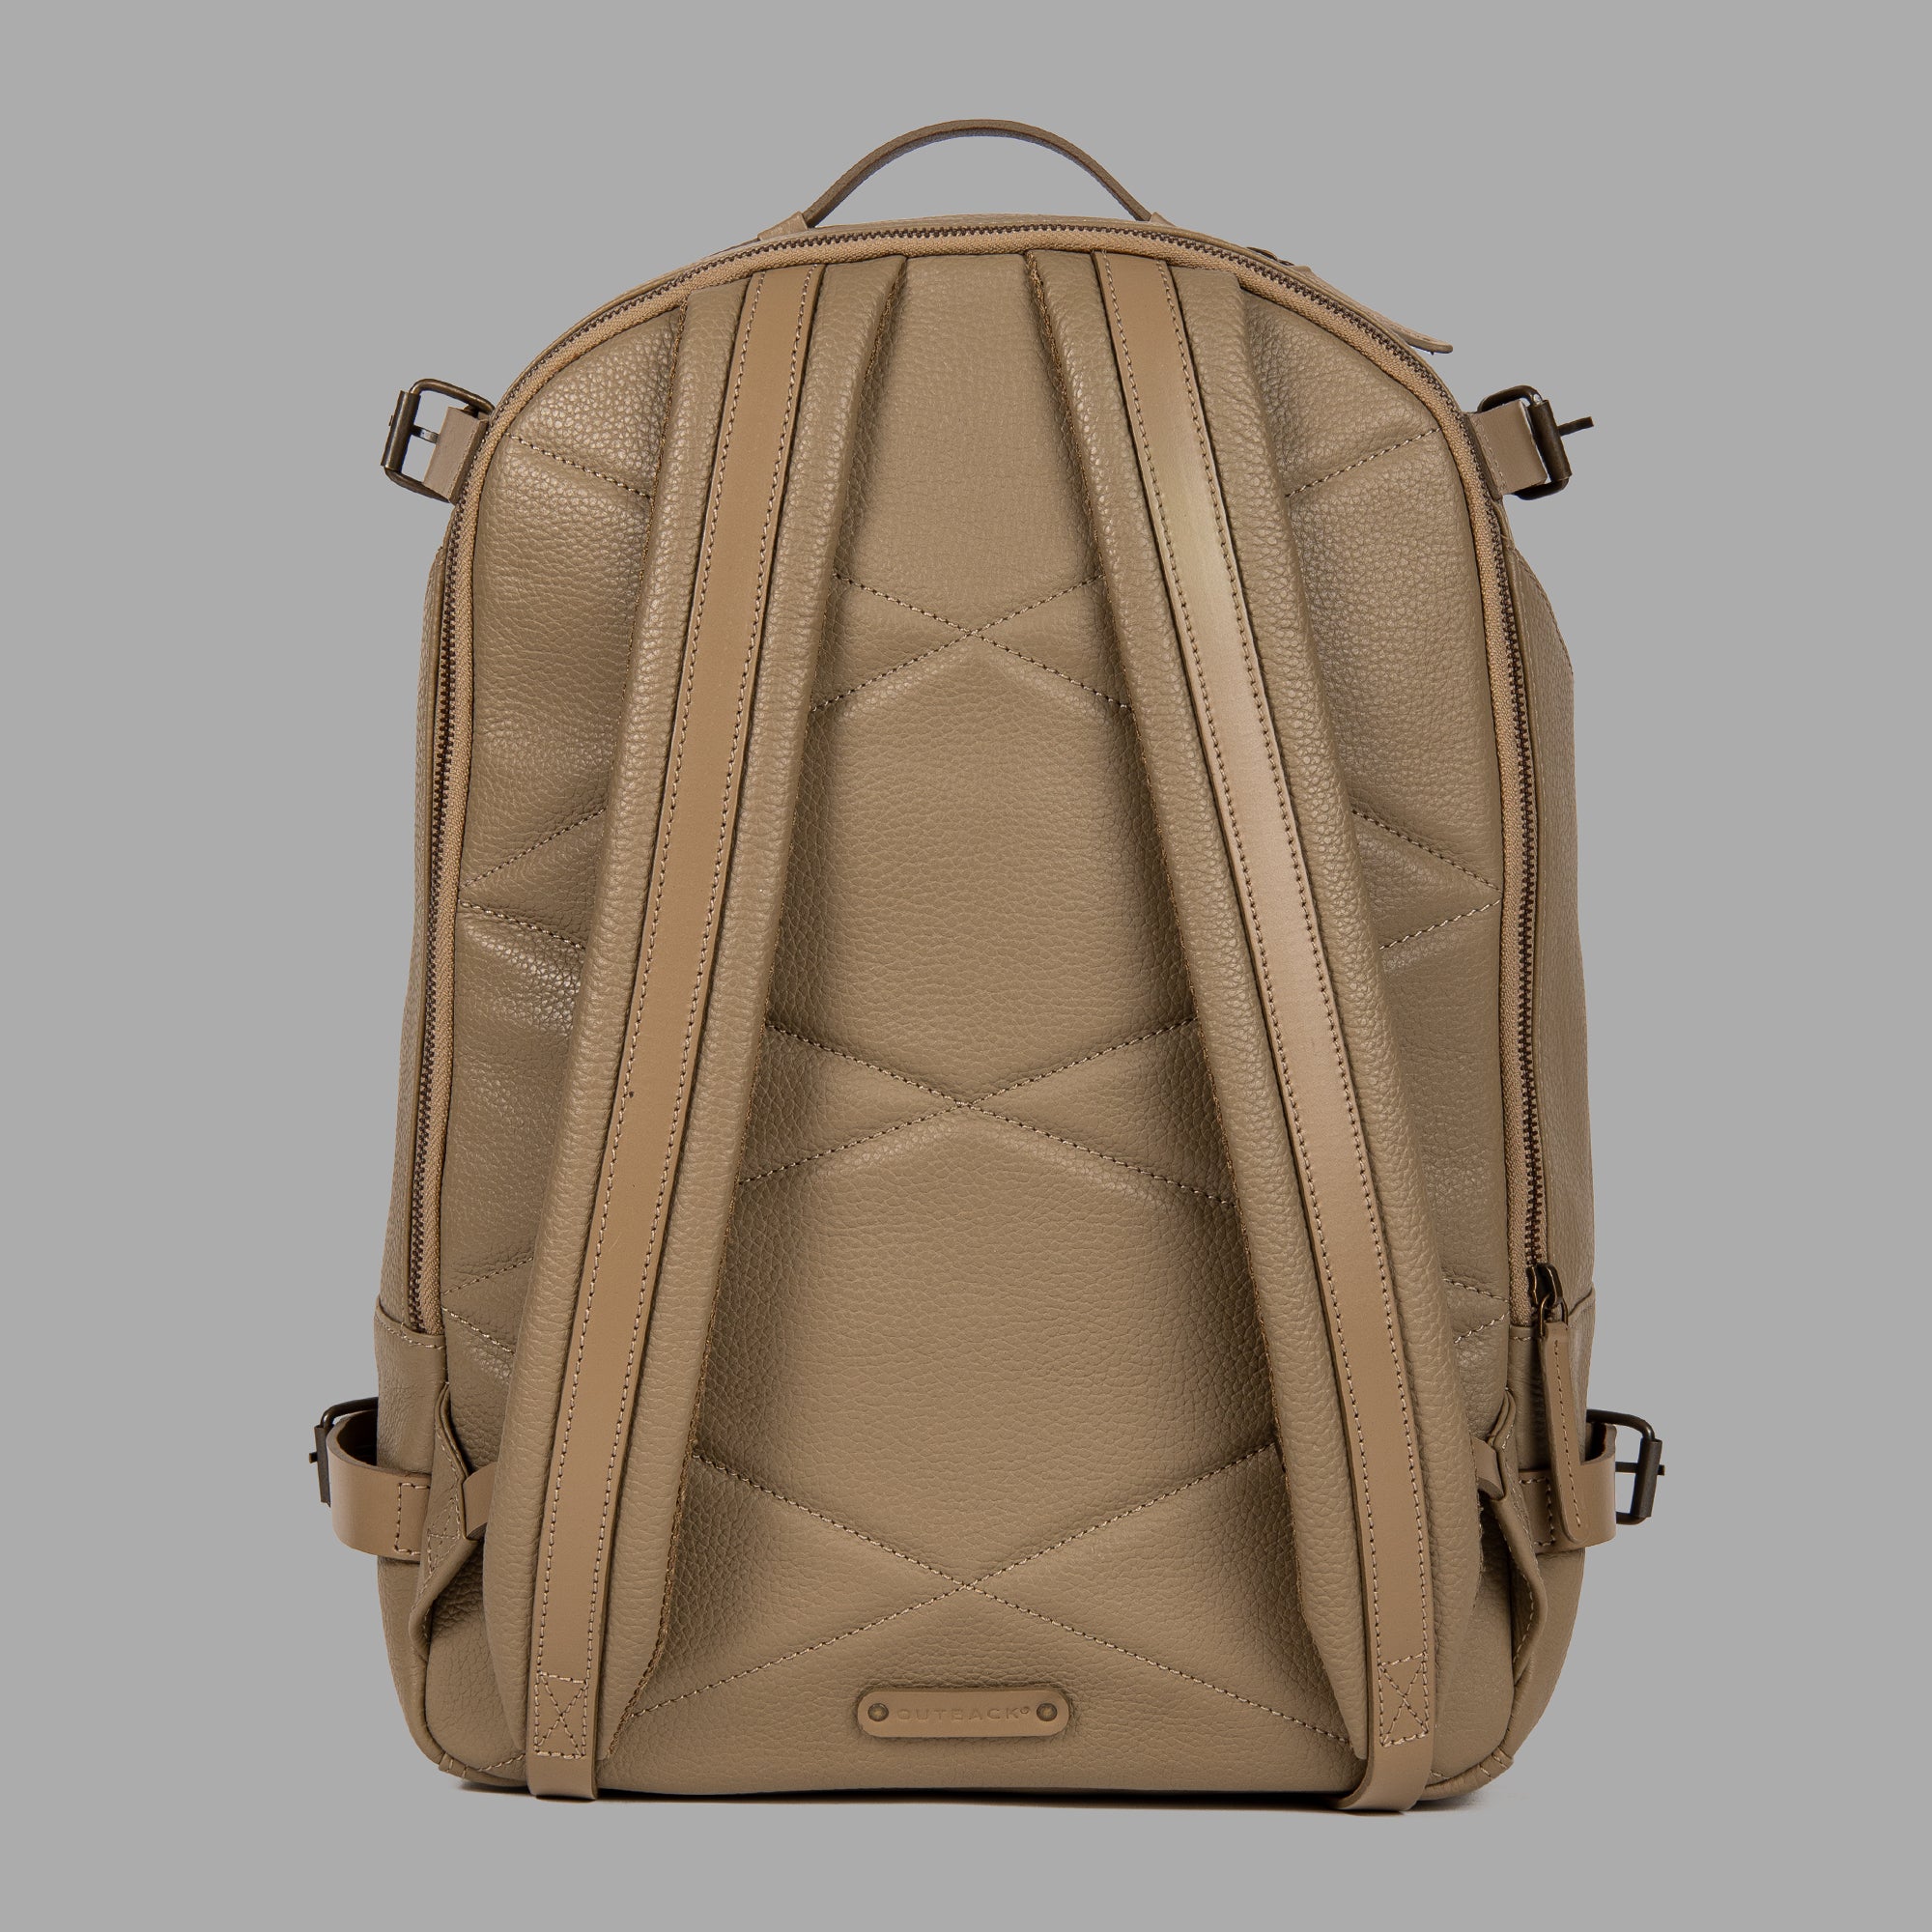 Mustang Leather Backpack